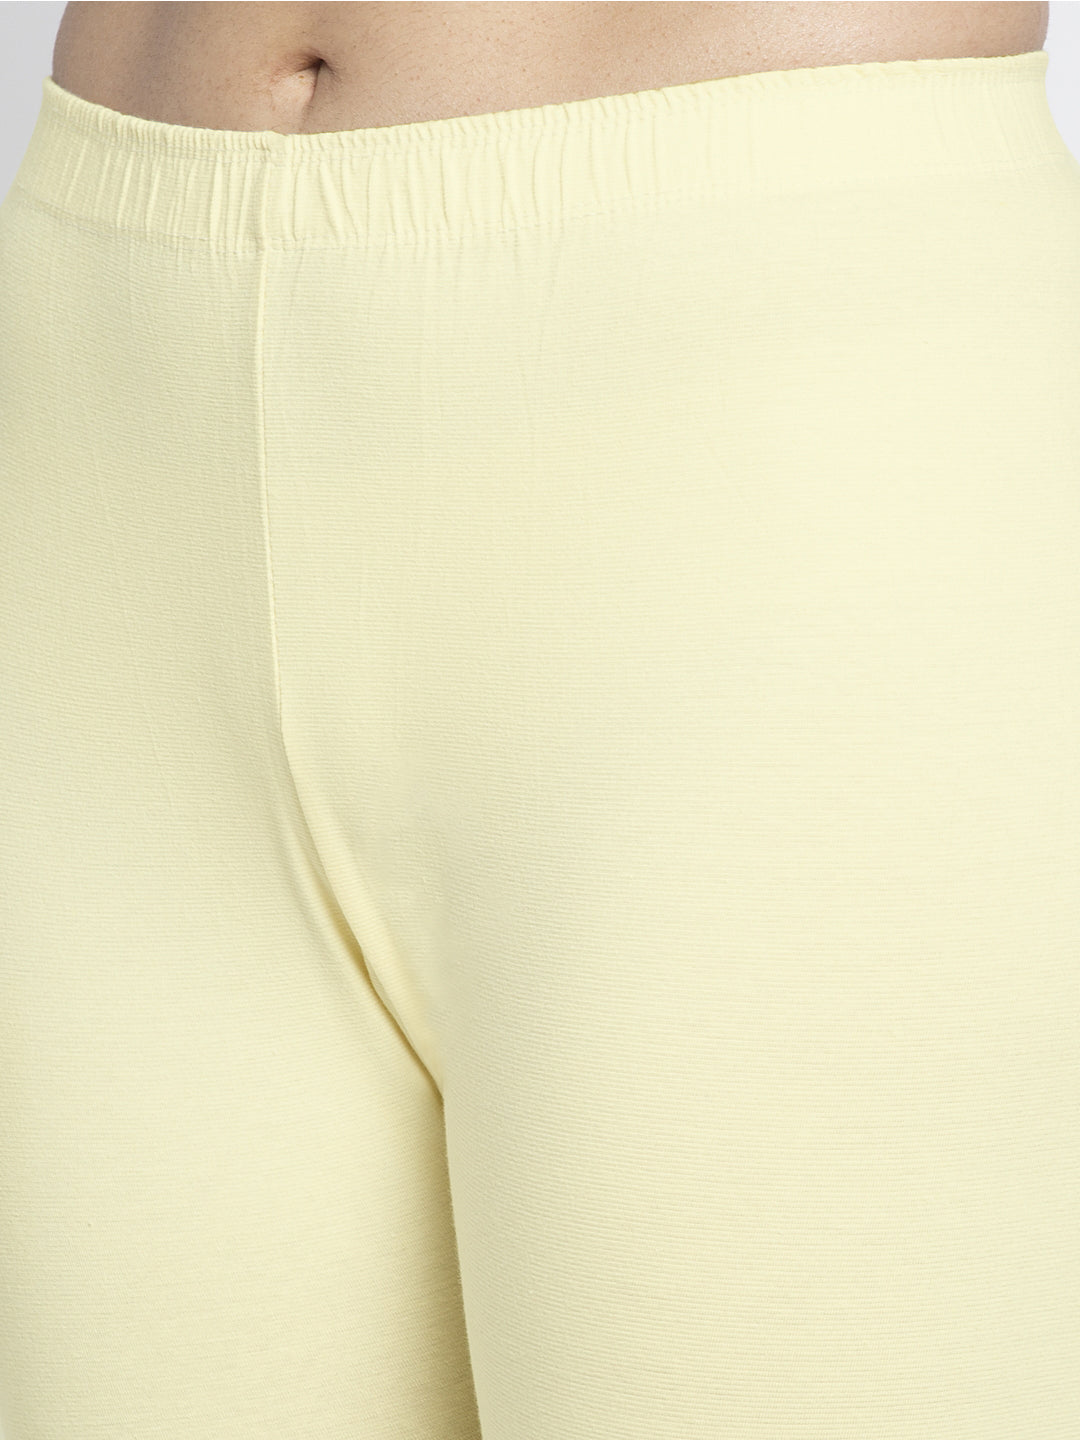 Off-White Modern Combed Lycra Solid Leggings